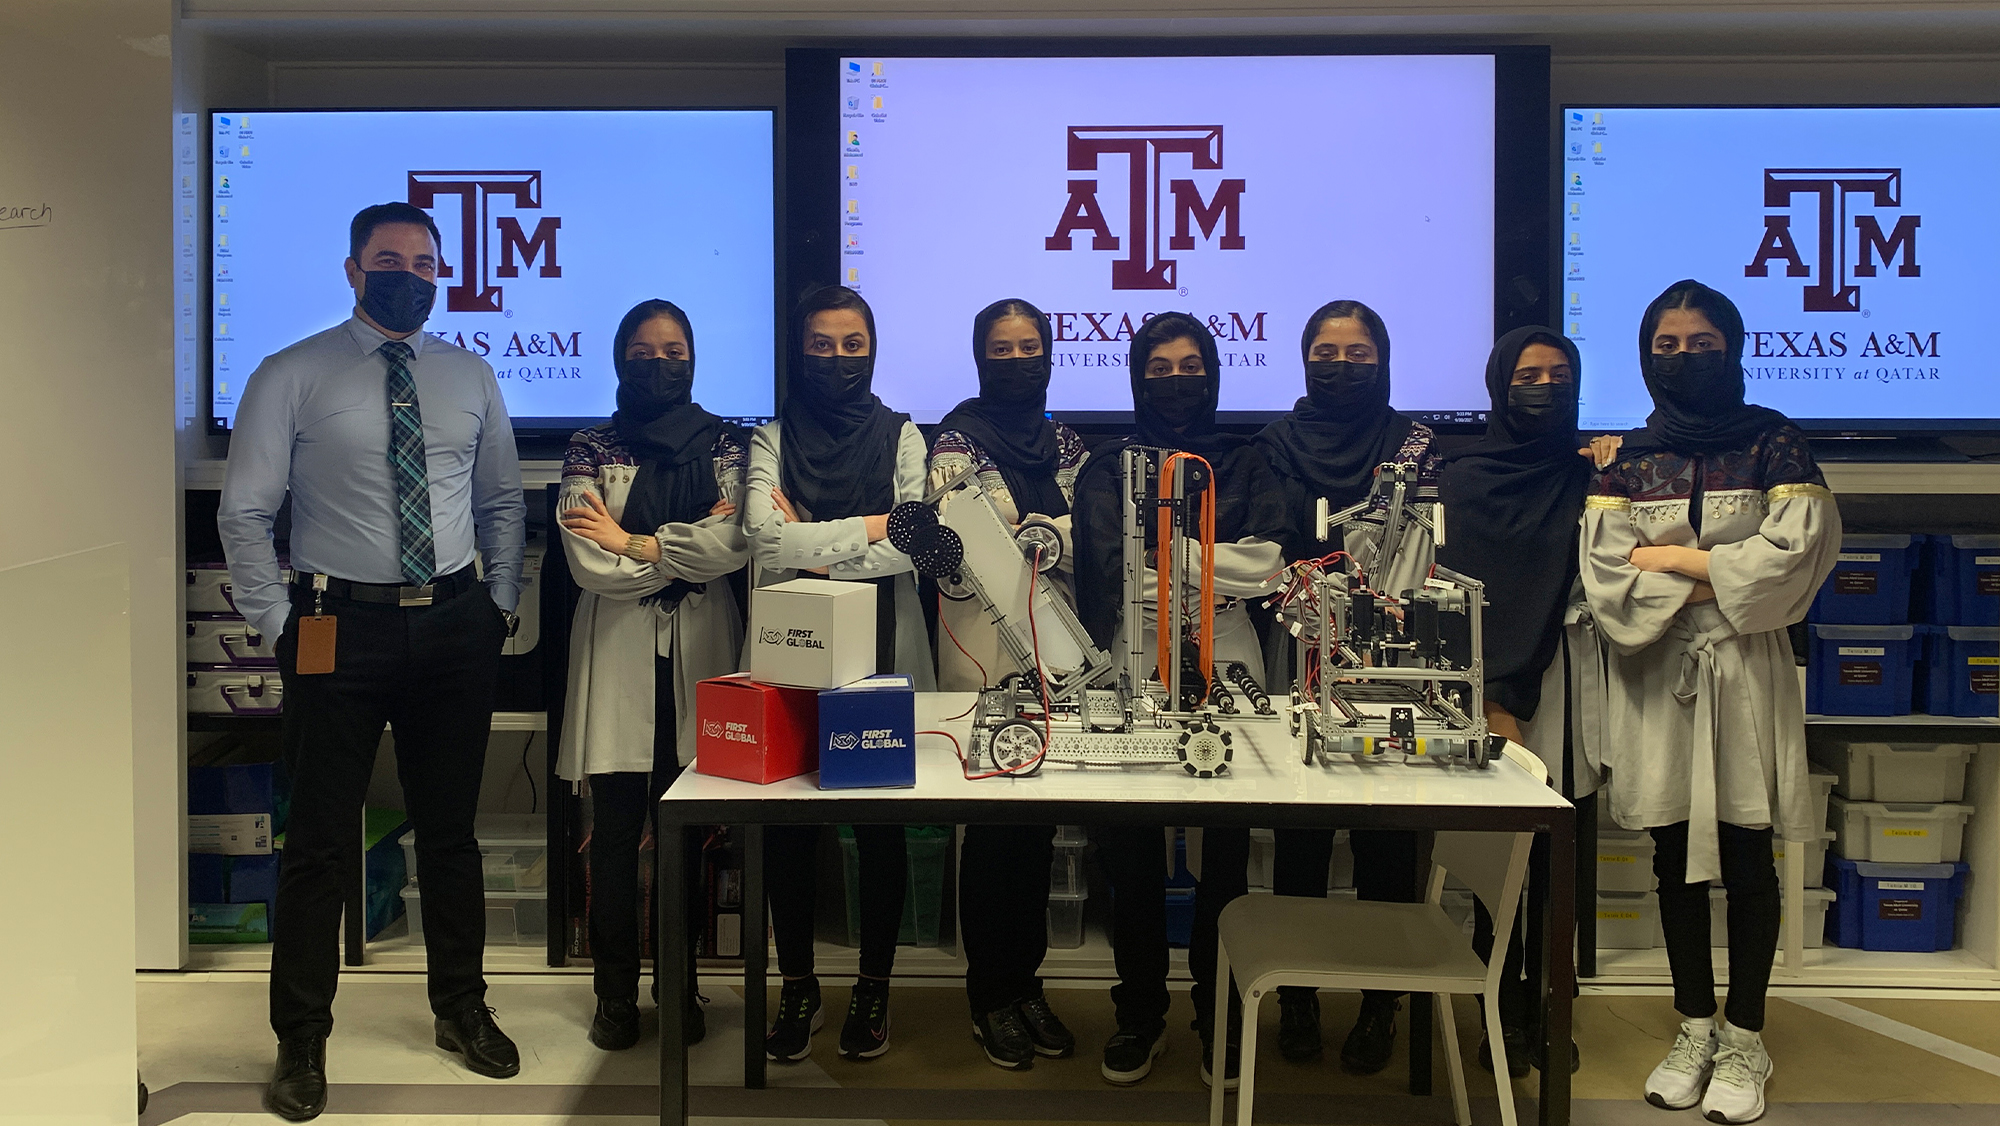 In the foreground, robots sit atop a table. Behind the table, Dr. Mohamed Gharib stands with the Afghan Dreamer team. In the background the Texas A&M University at Qatar logo is displayed on three television monitors.